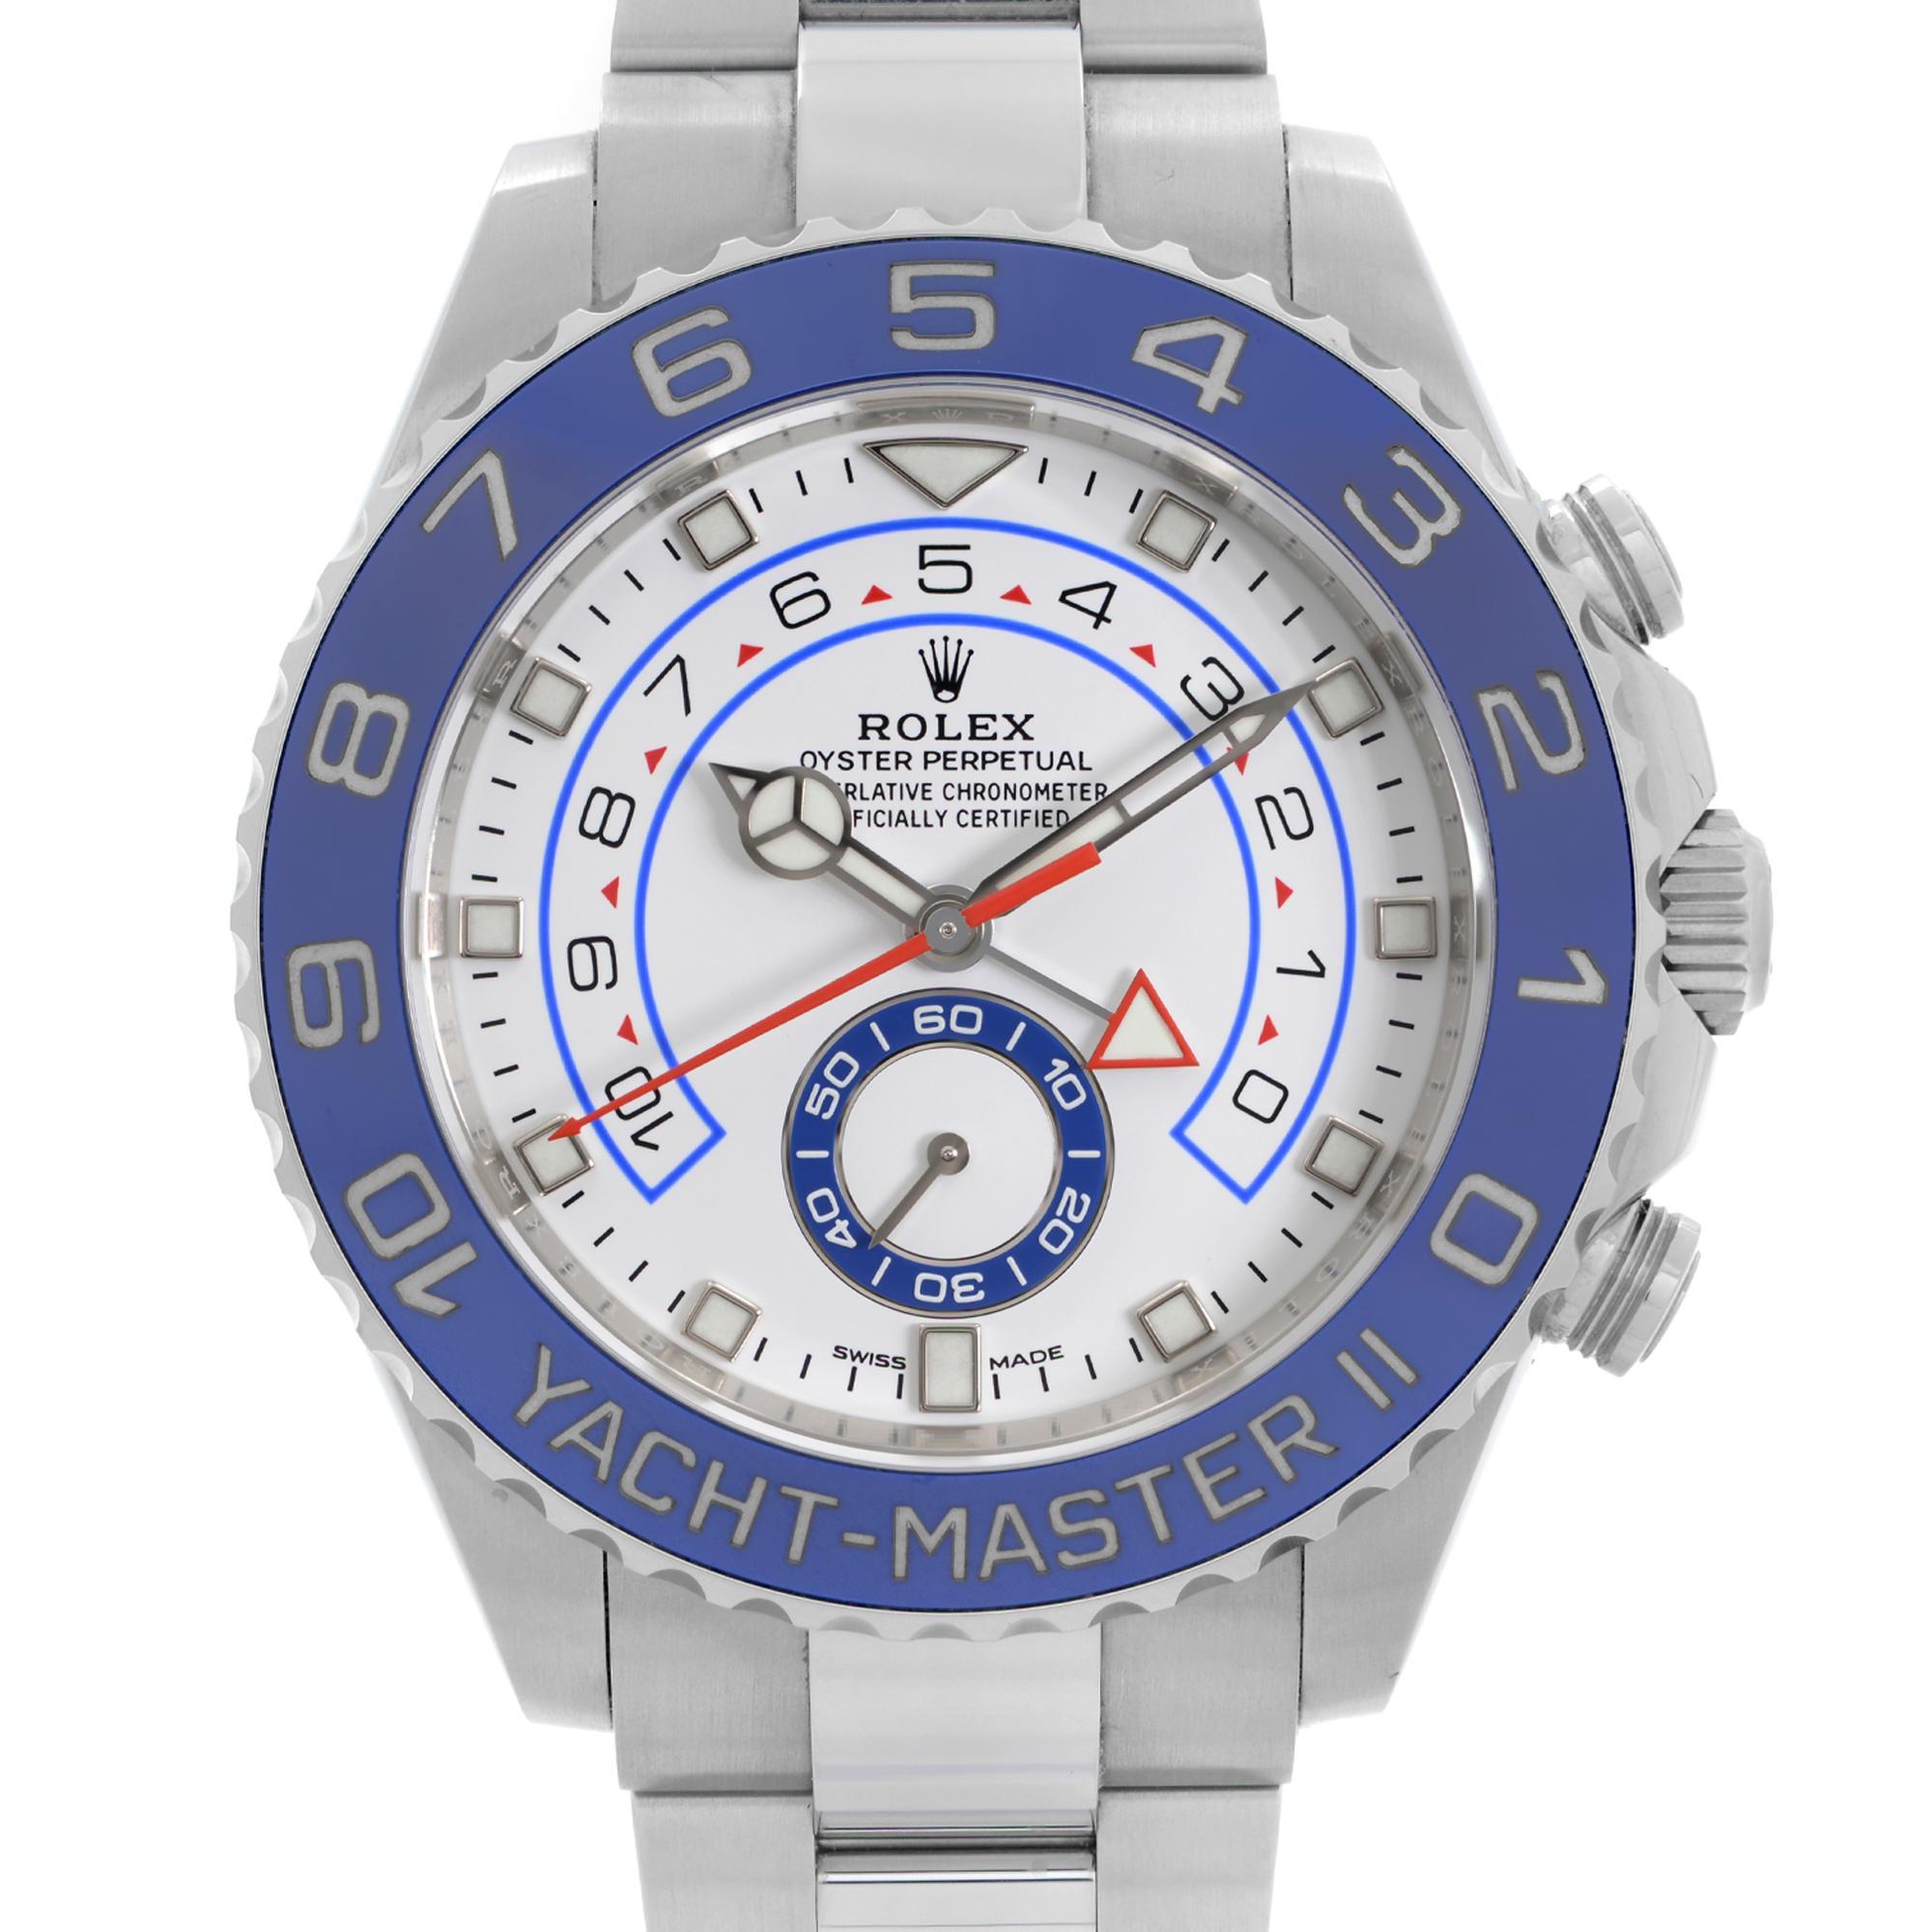 Display Model 2021 Card Rolex Yacht-Master II 44mm Ceramic Steel White Dial Automatic Mens Watch 116680. This Beautiful Timepiece is Powered By a Mechanical (Automatic) Movement and Features; Stainless Steel Case with Stainless Steel Oyster